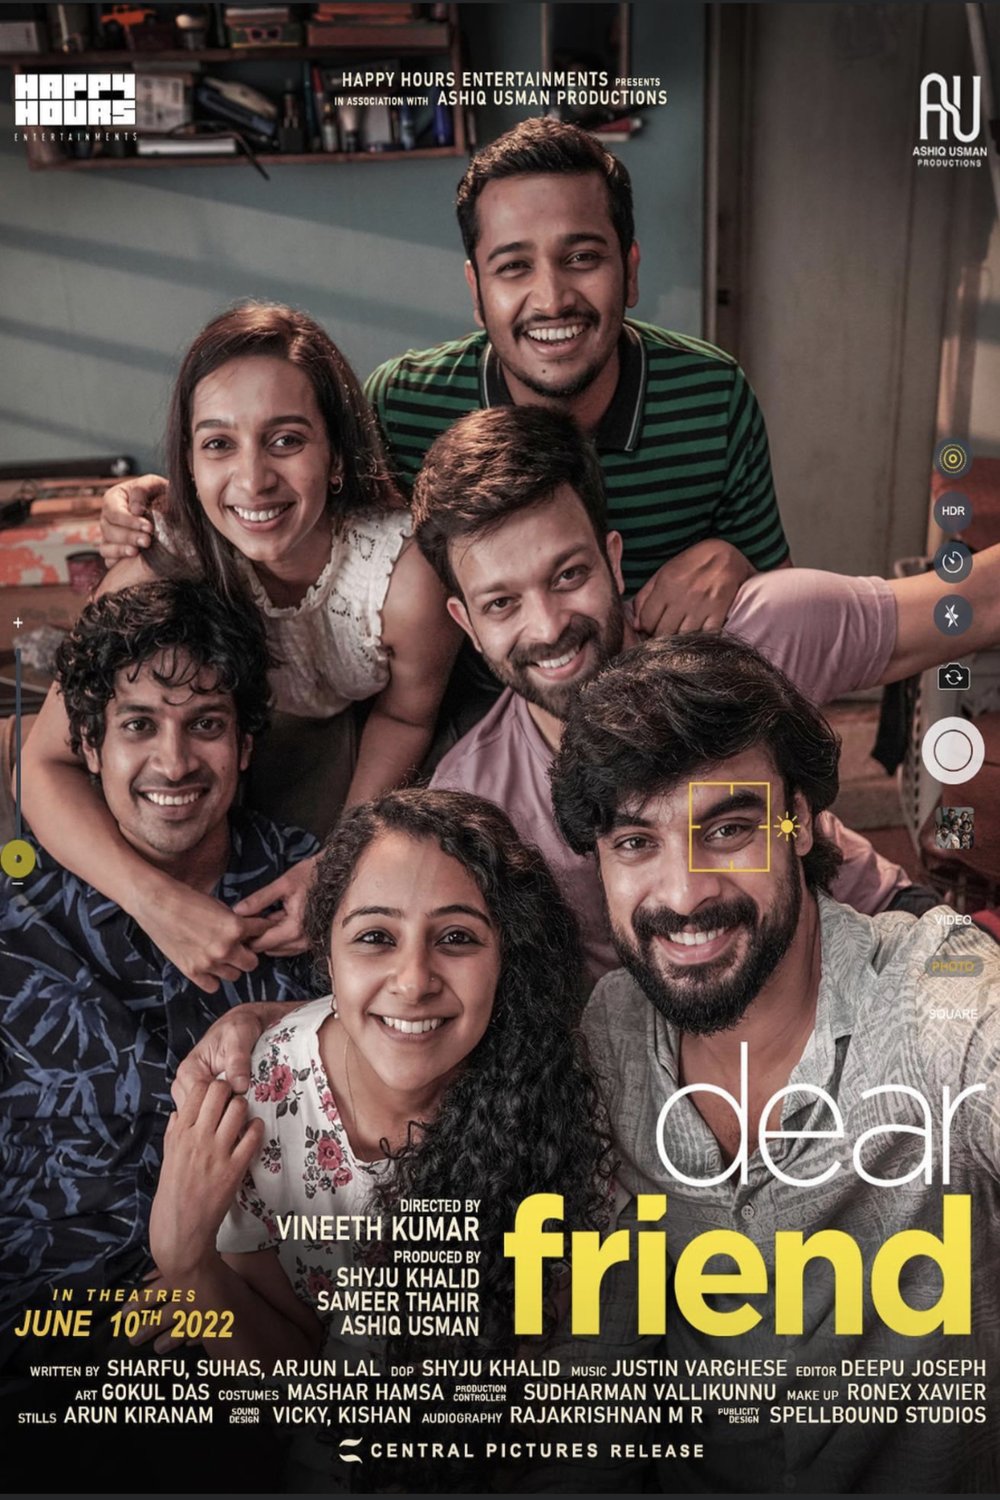 Malayalam poster of the movie Dear Friend